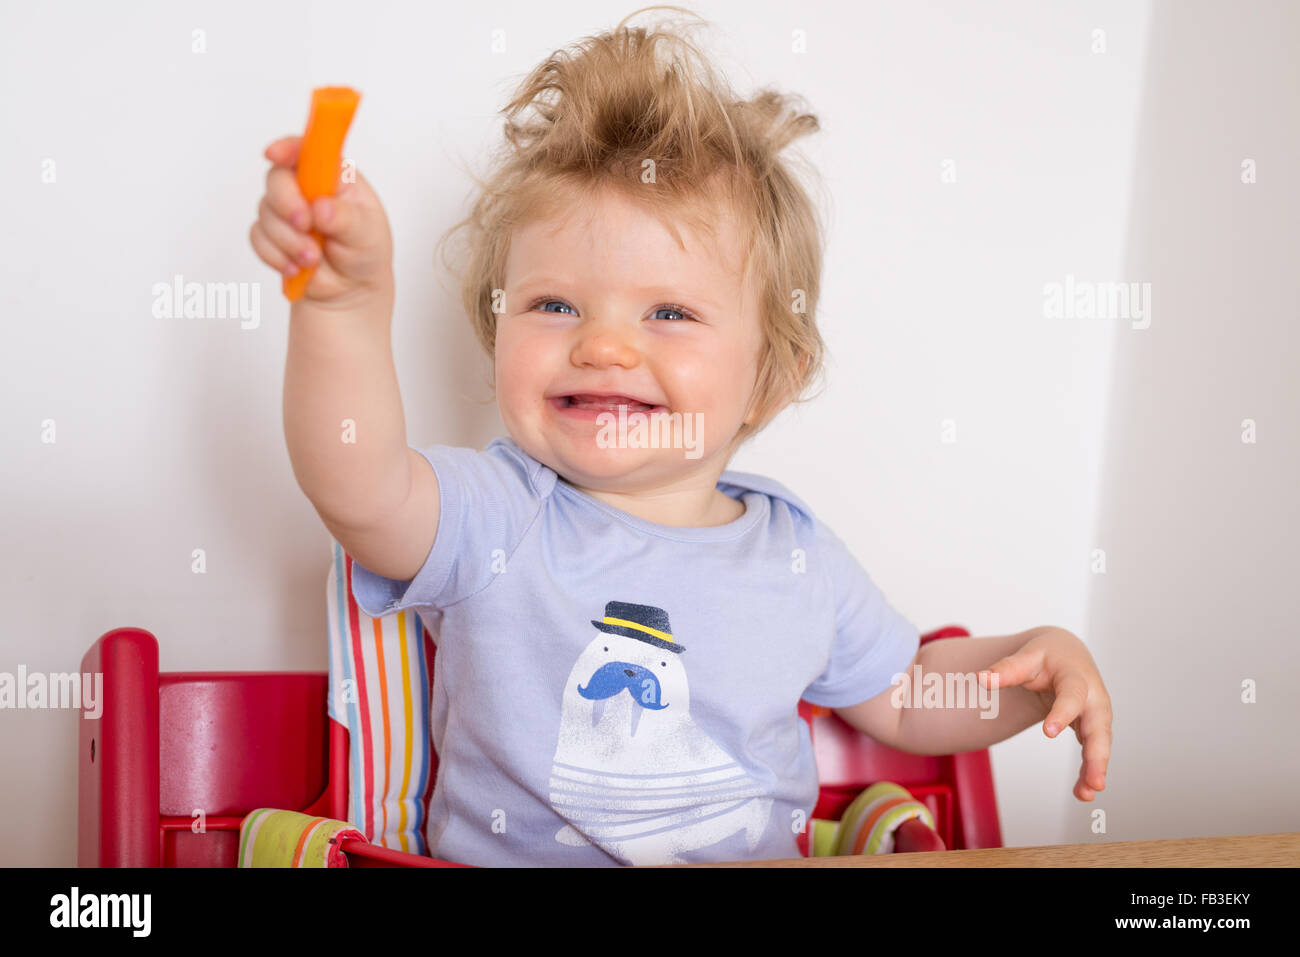 Happy one year old baby eating carrots Stock Photo